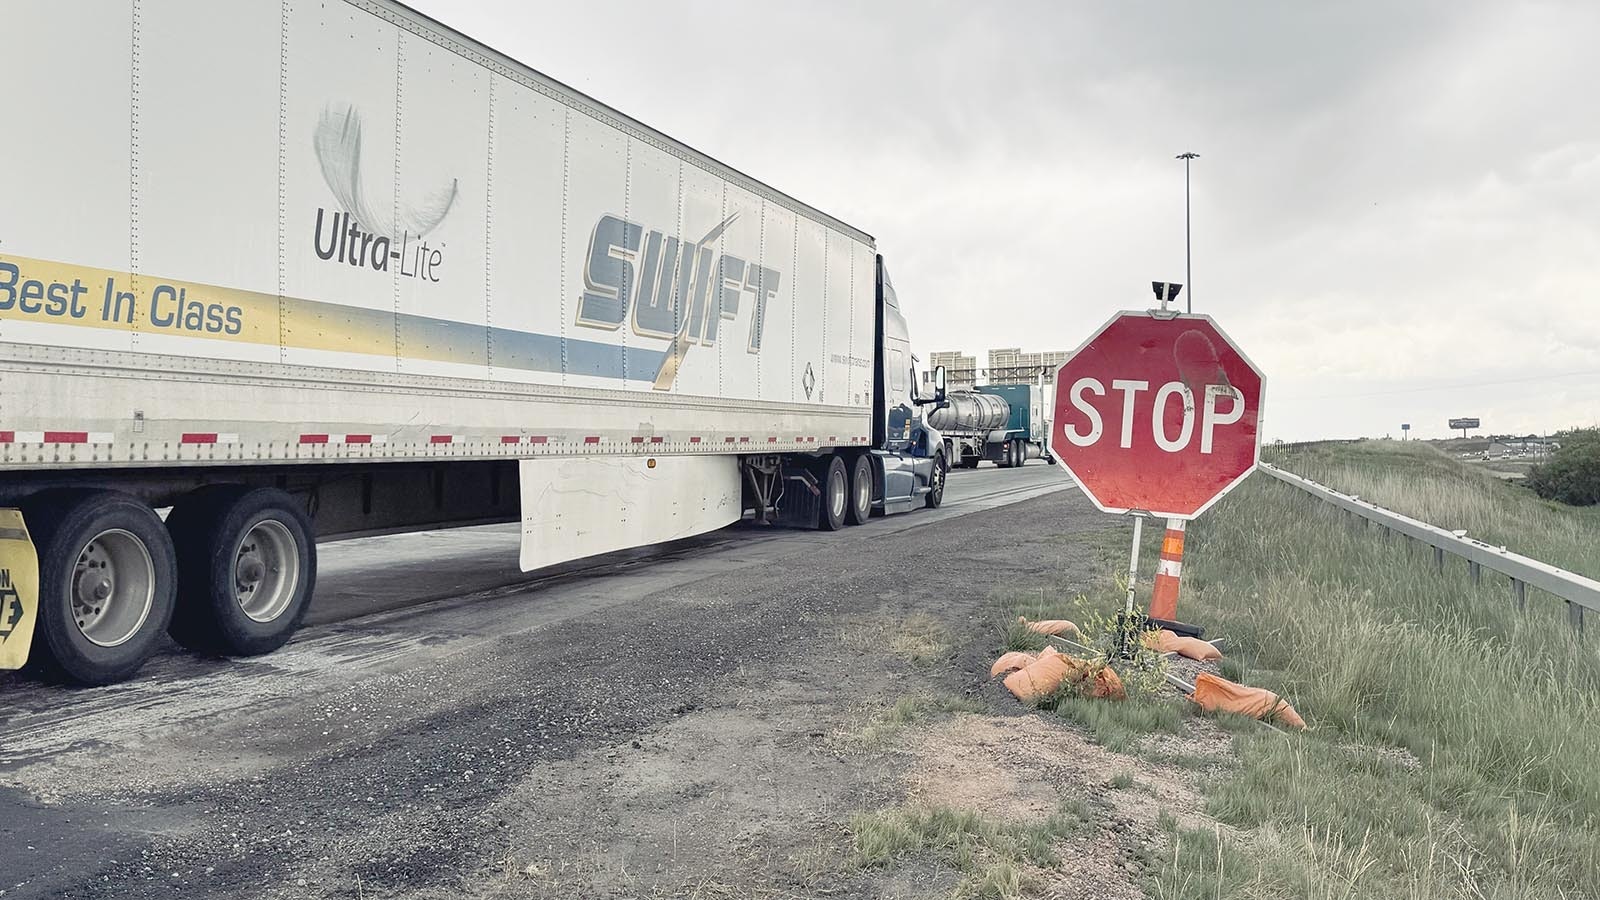 Truckers and commuters were seen running a stop sign located at the Cheyenne interchange when exiting from the northbound lane of Interstate 25 to the eastbound Interstate 80. Traffic has narrowed to a single lane along the I-80, with the stop sign placed at the merging exit from the I-25 to help with traffic flows and avoid potential crashes.